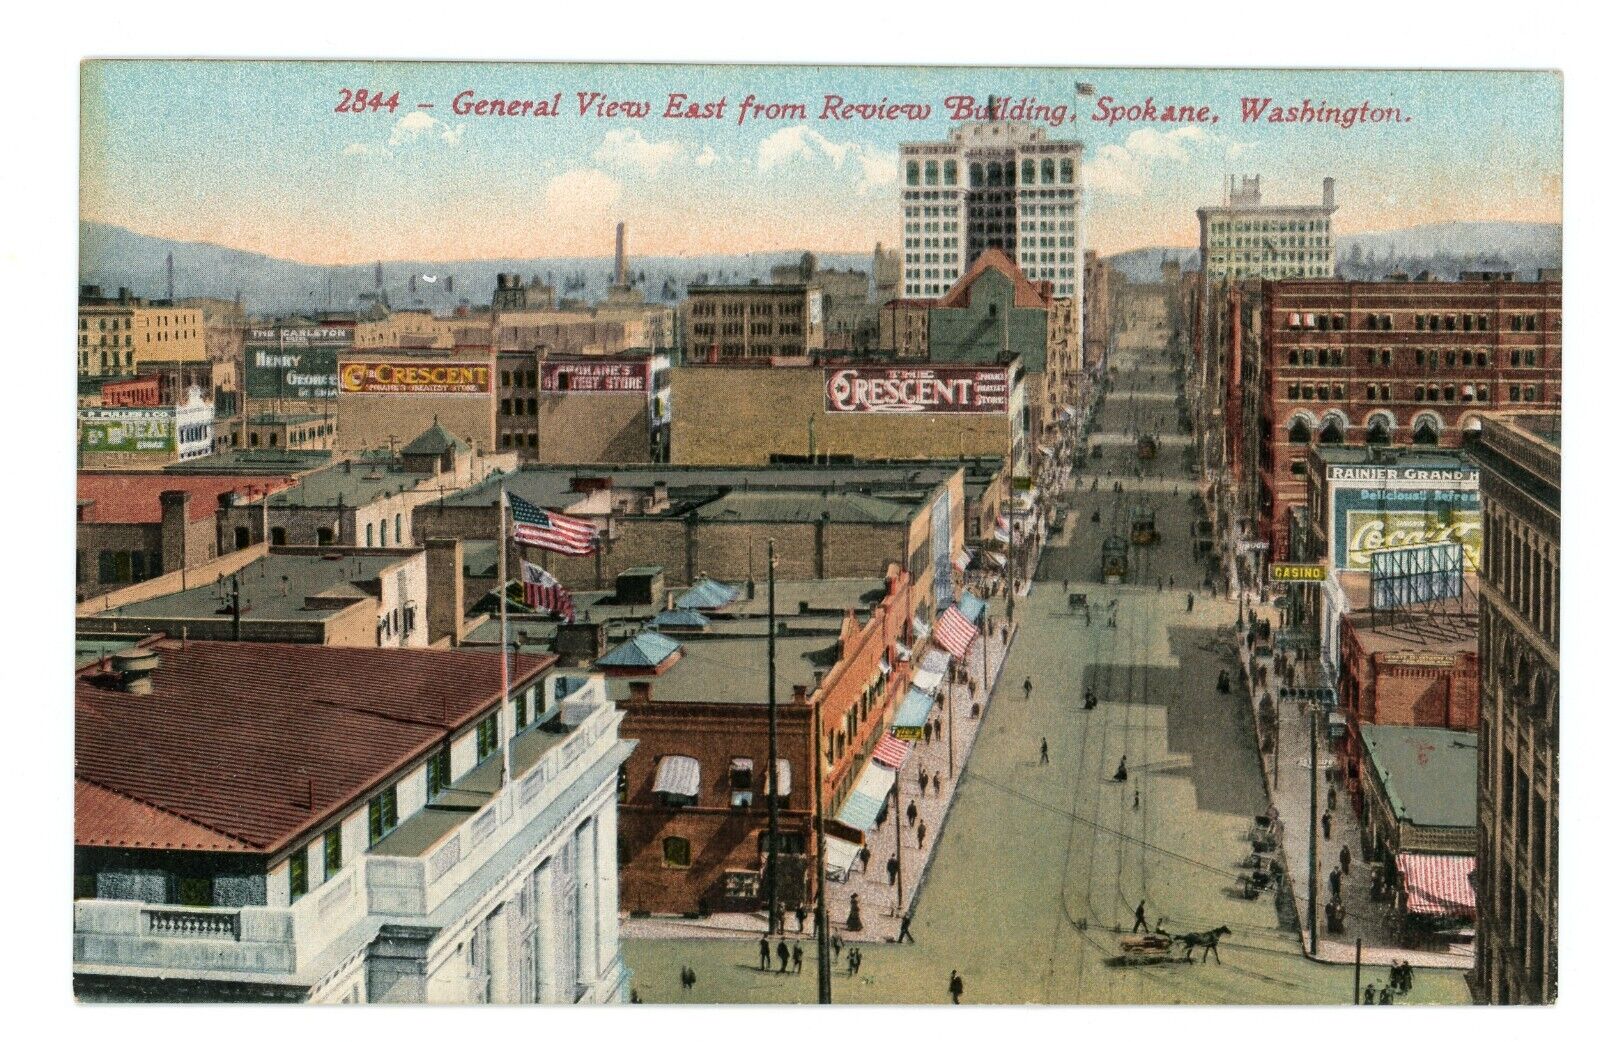 Spokane Washington General View East from Review Building Vintage Postcard